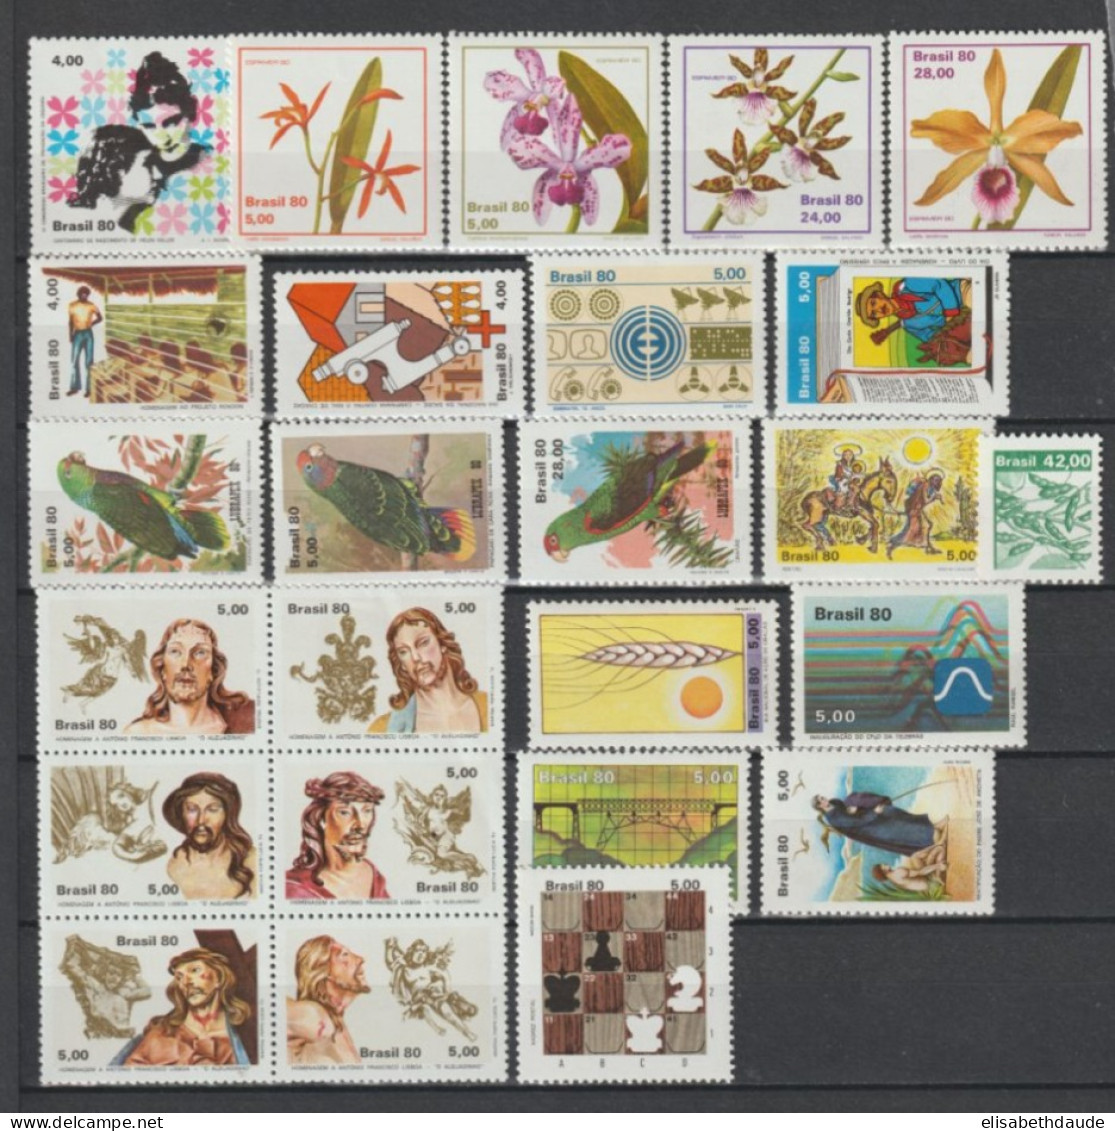 BRESIL - 1979/1980 - COLLECTION PRESQUE COMPLETE ! ** MNH - COTE YVERT = 118.2 EUR. - 3 PAGES - Colecciones & Series